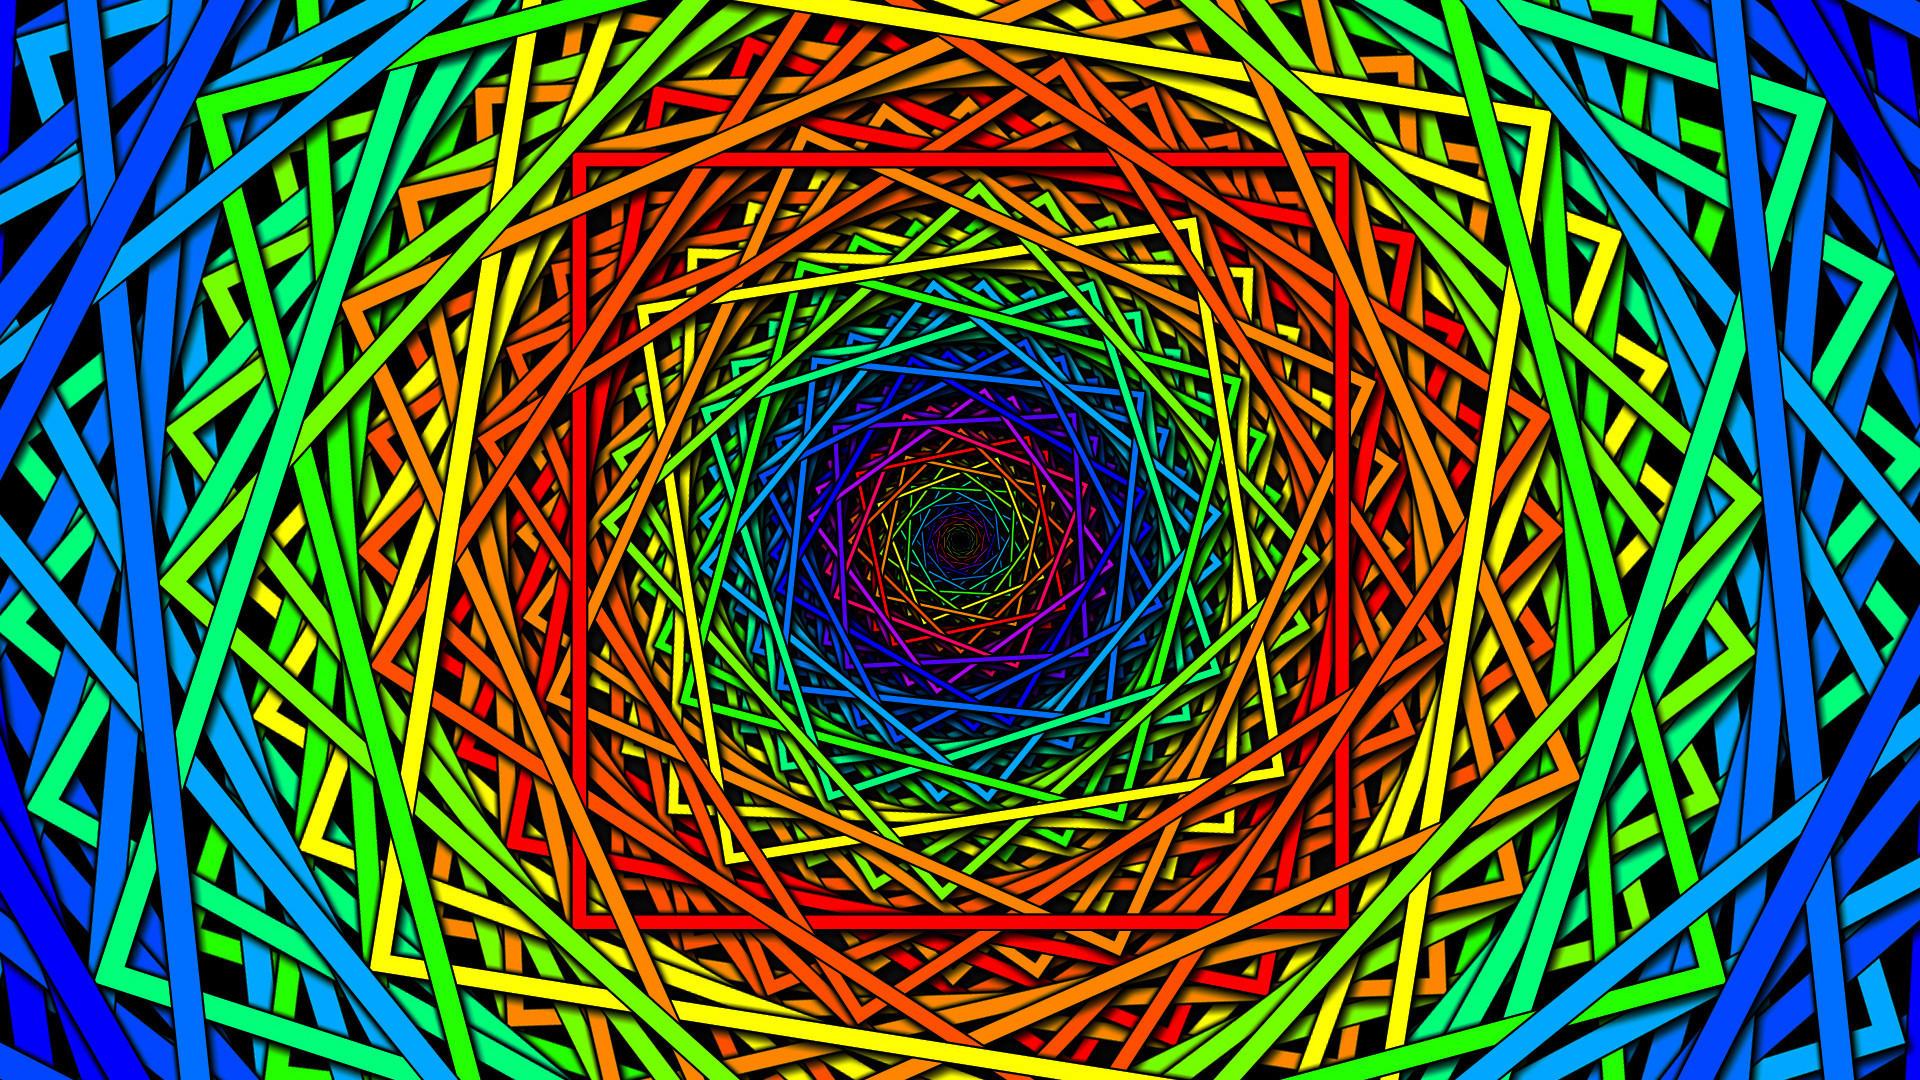 This image is made up of shapes, different coloured squares, making an optical illusion, squares made to look quite circular